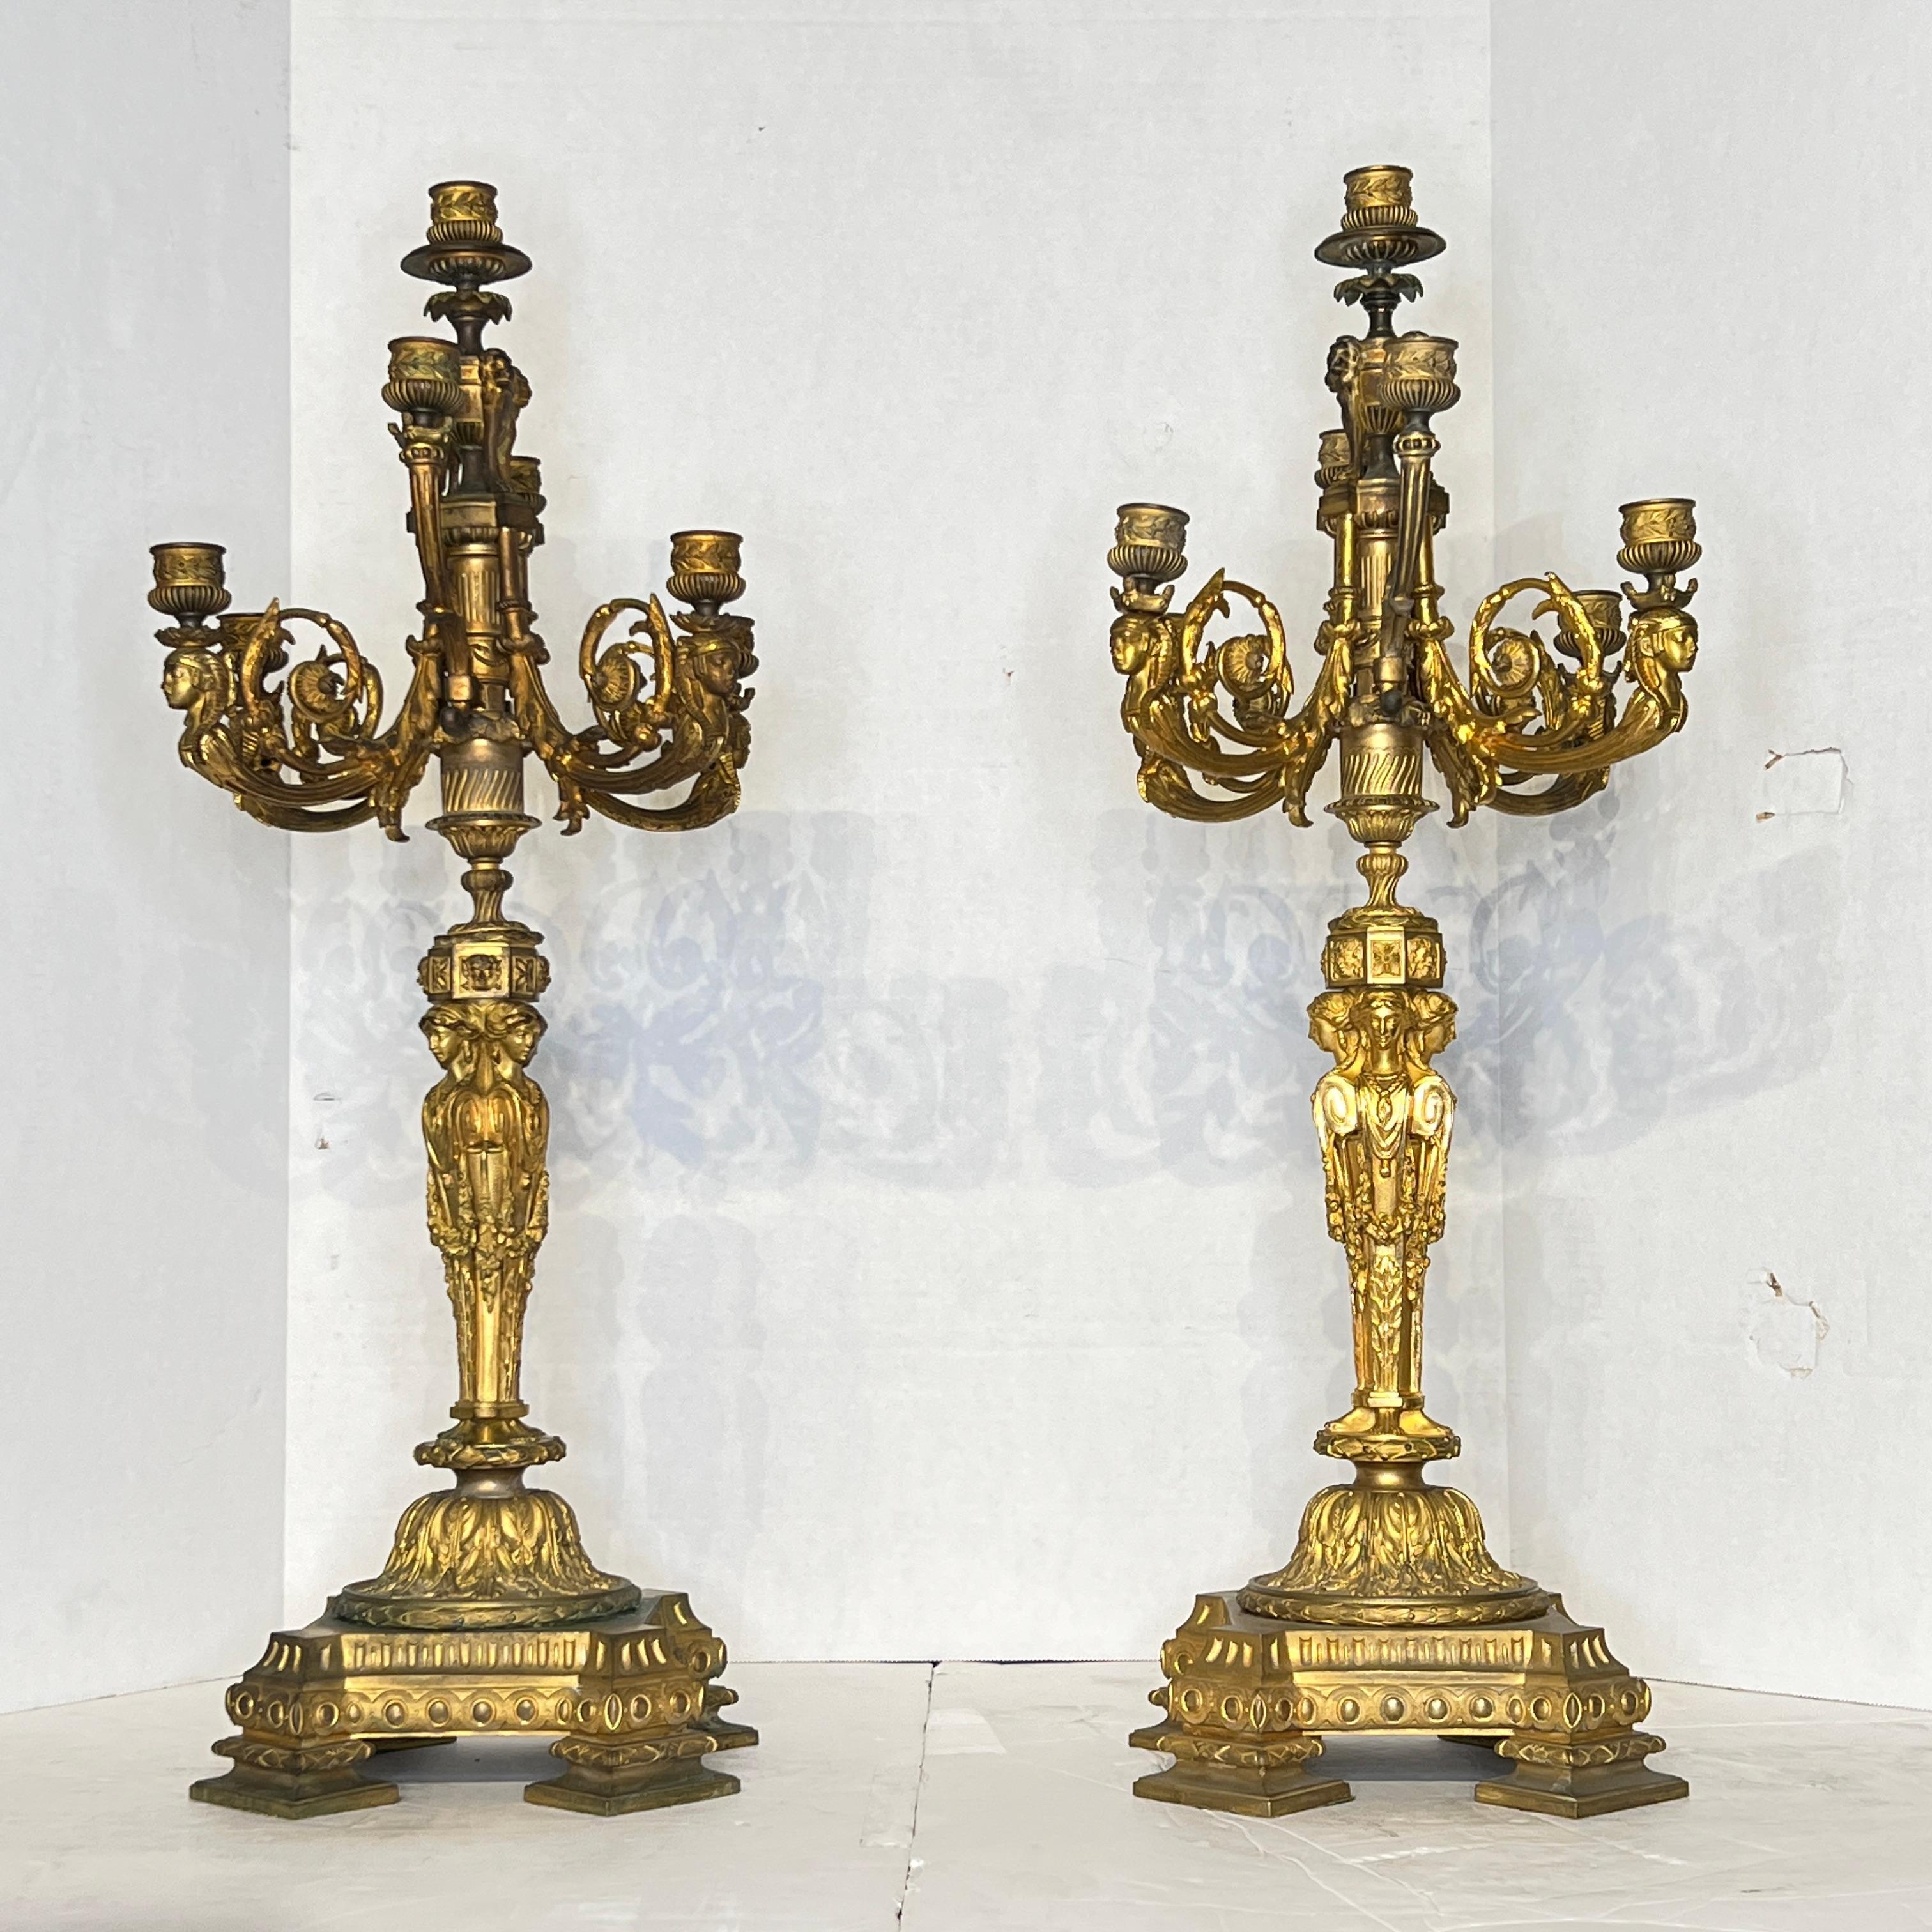 Pair of large gilt bronze candelabra from the Egyptian Revival period, with seven lights and finely cast figurative designs.